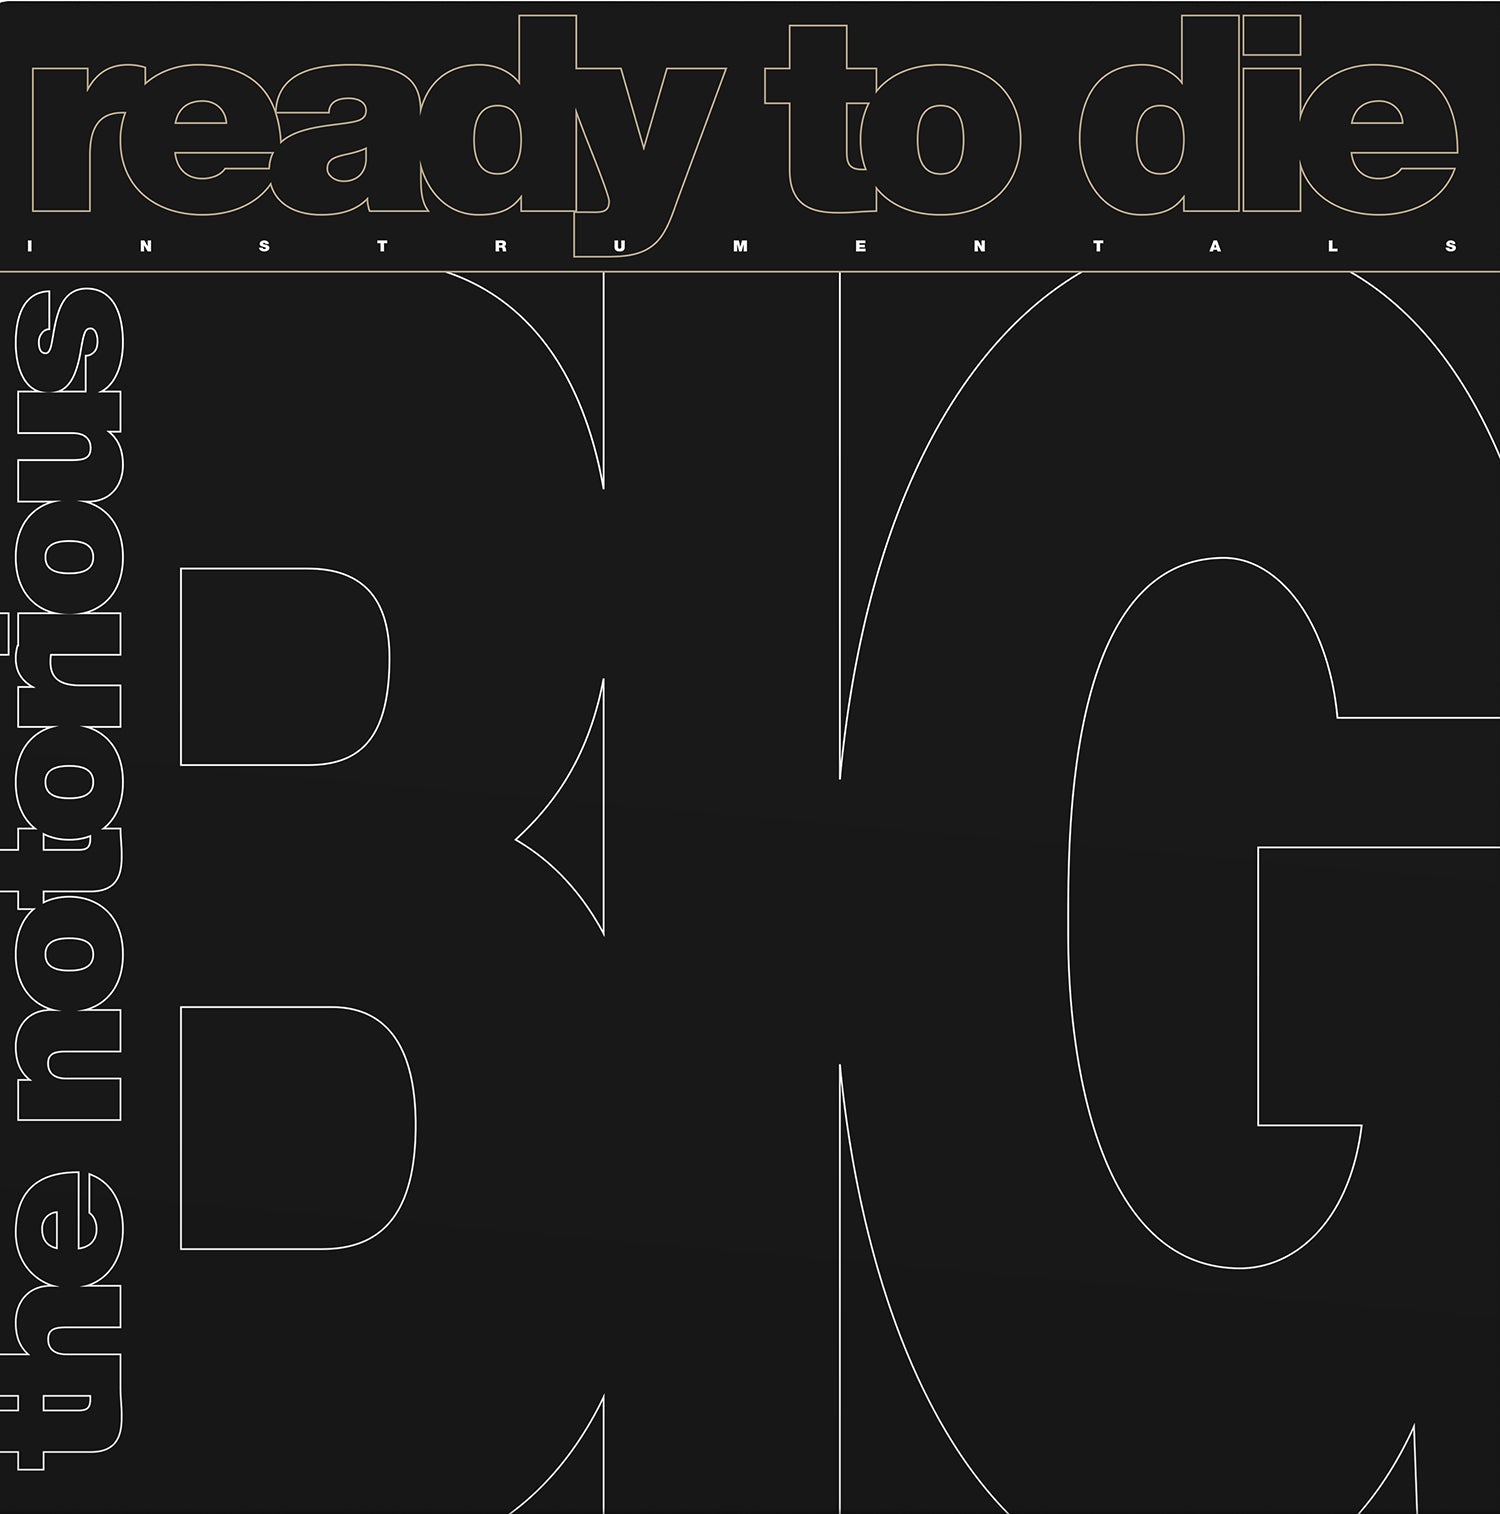 The NOTORIOUS B.I.G. 'READY TO DIE: THE INSTRUMENTAL'